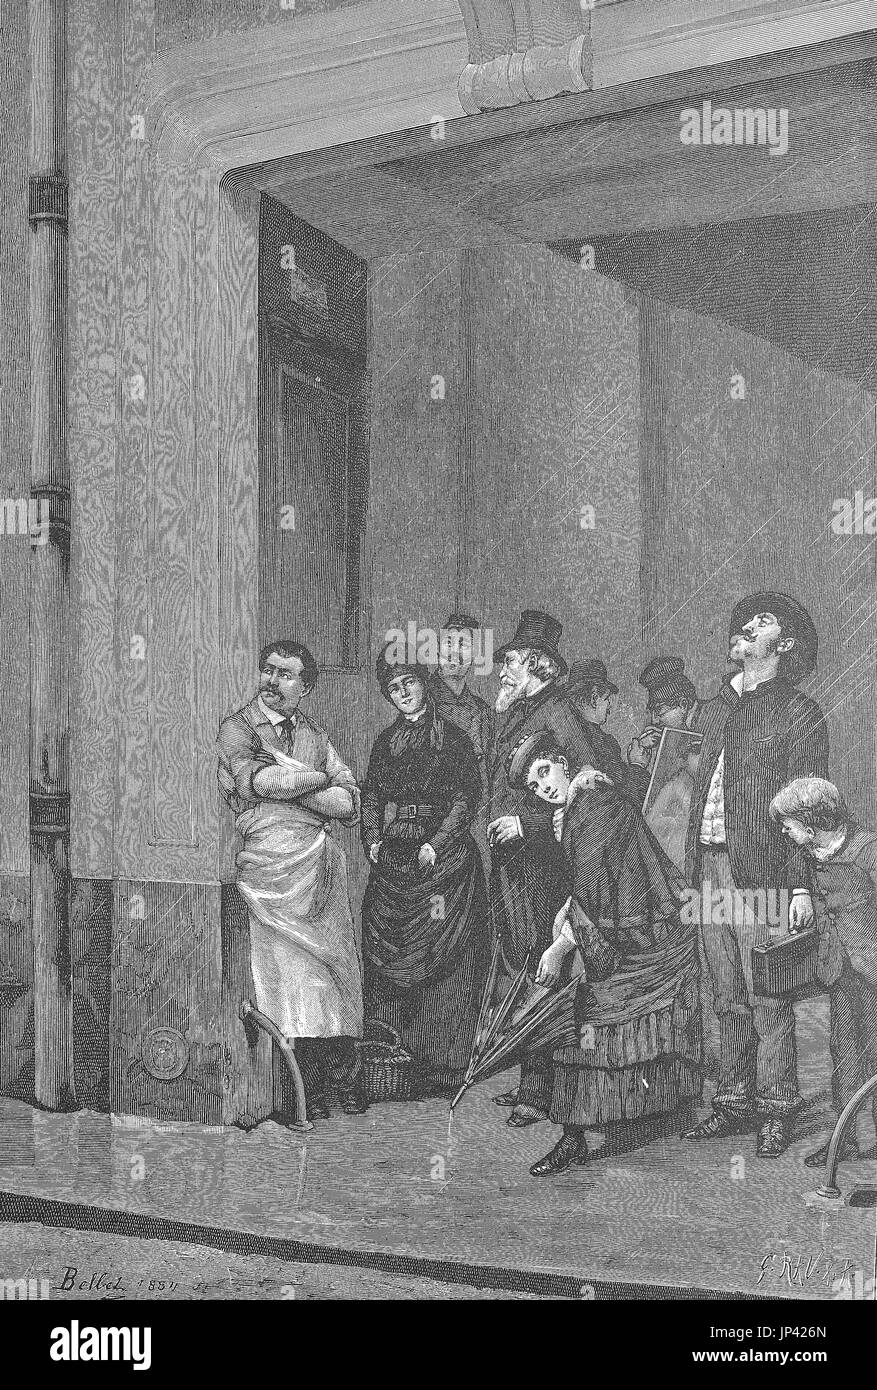 Rainy weather, people stand under one roof and wait for the rain to stop, painting from A. Bellet, digital improved reproduction of a woodcut publication from the year 1888 Stock Photo